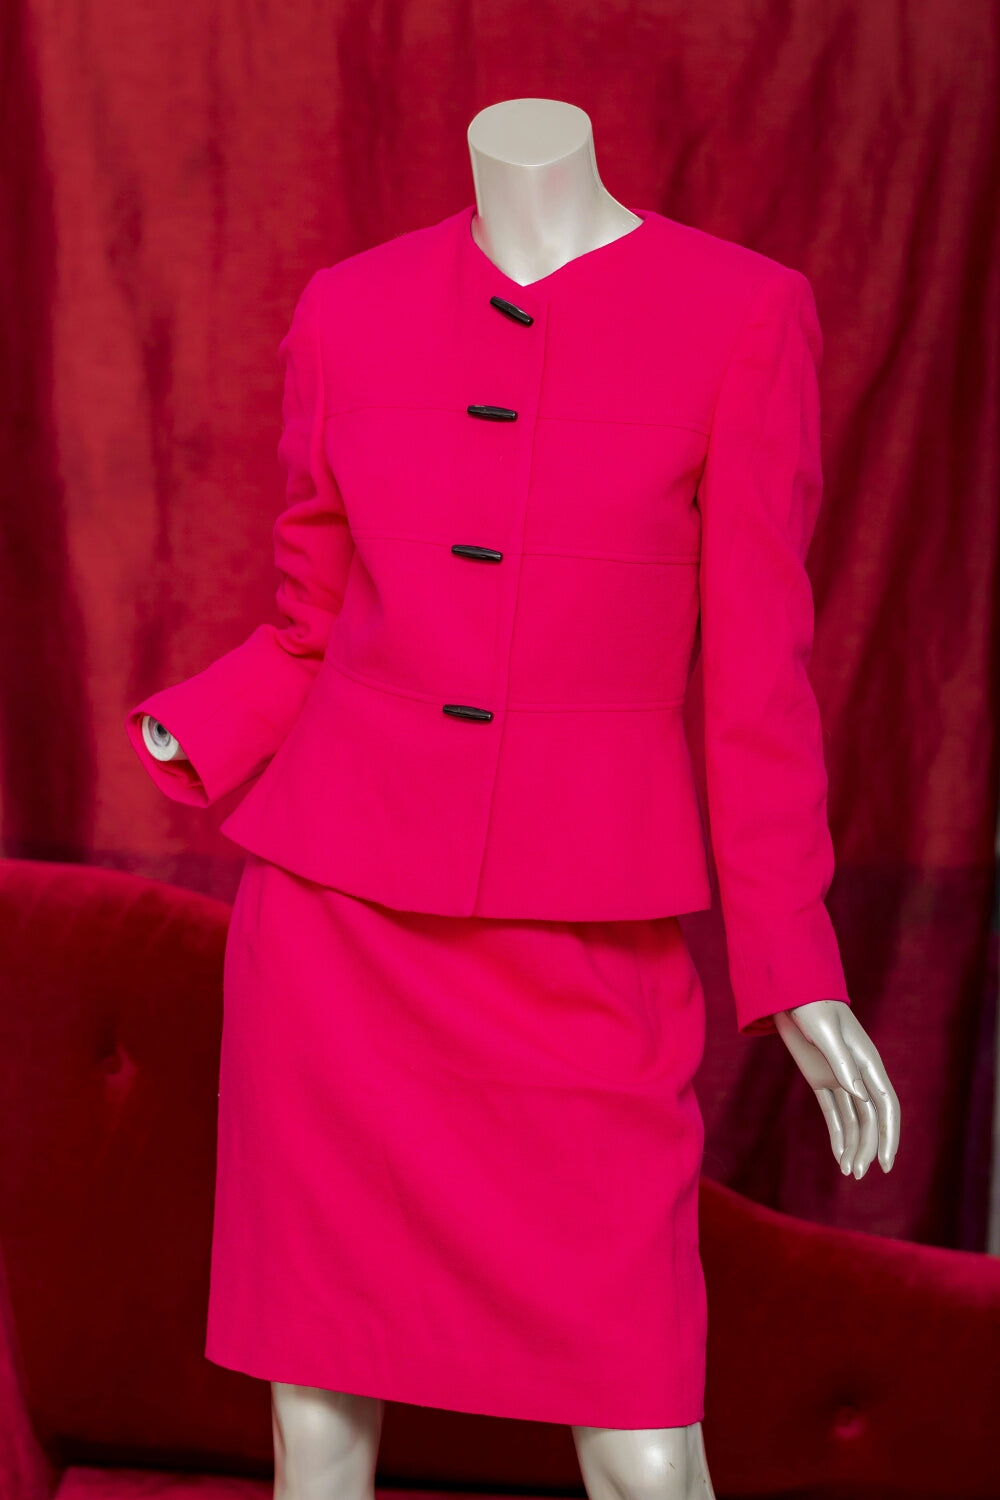 Suit: Long Sleeve Red Top and Skirt